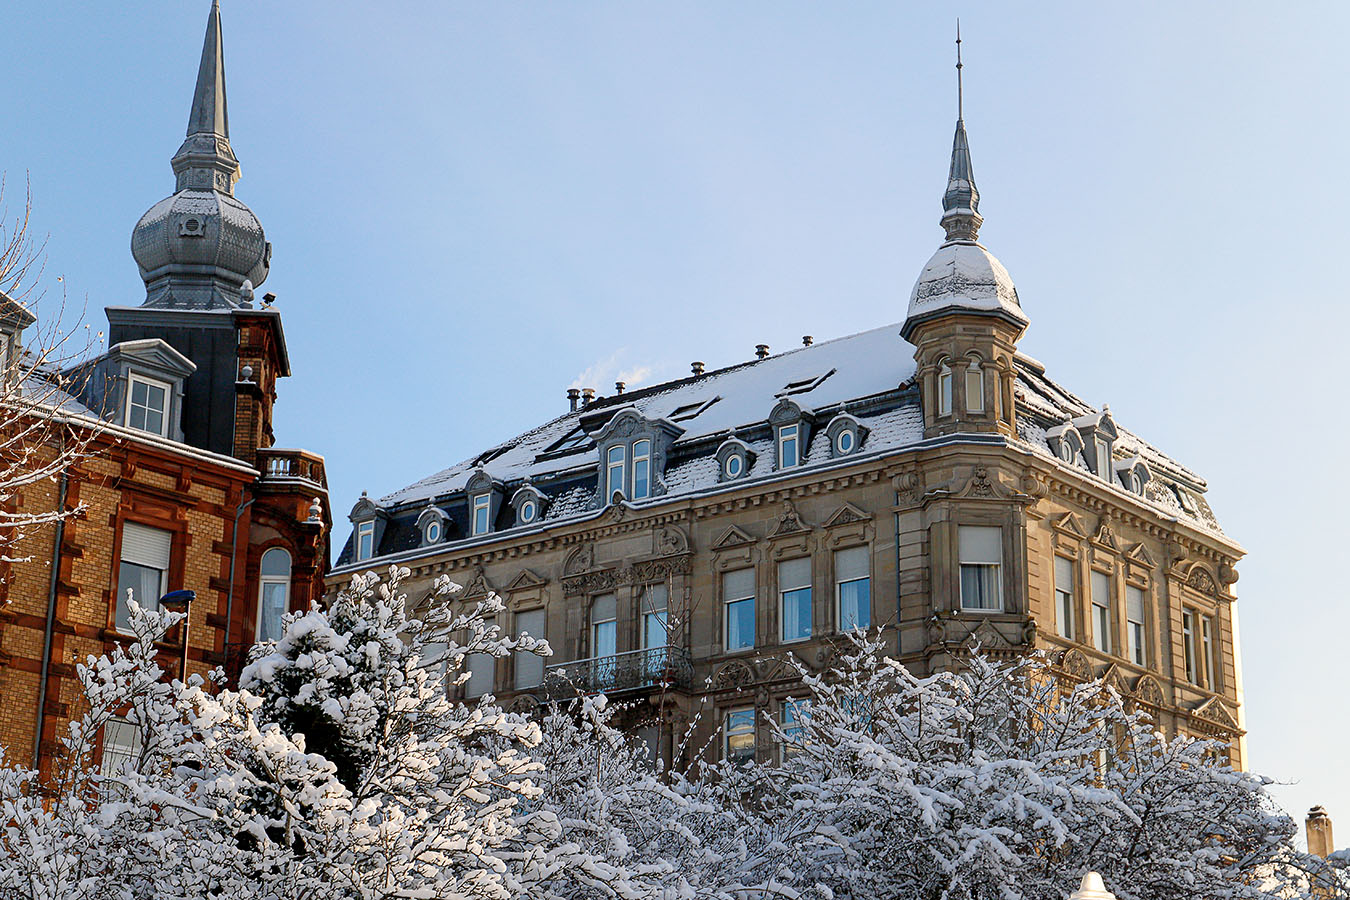 Snow-covered roofs of iconic buildings in the city of Sarreguemines. ©2021 Mathieu Improvisato